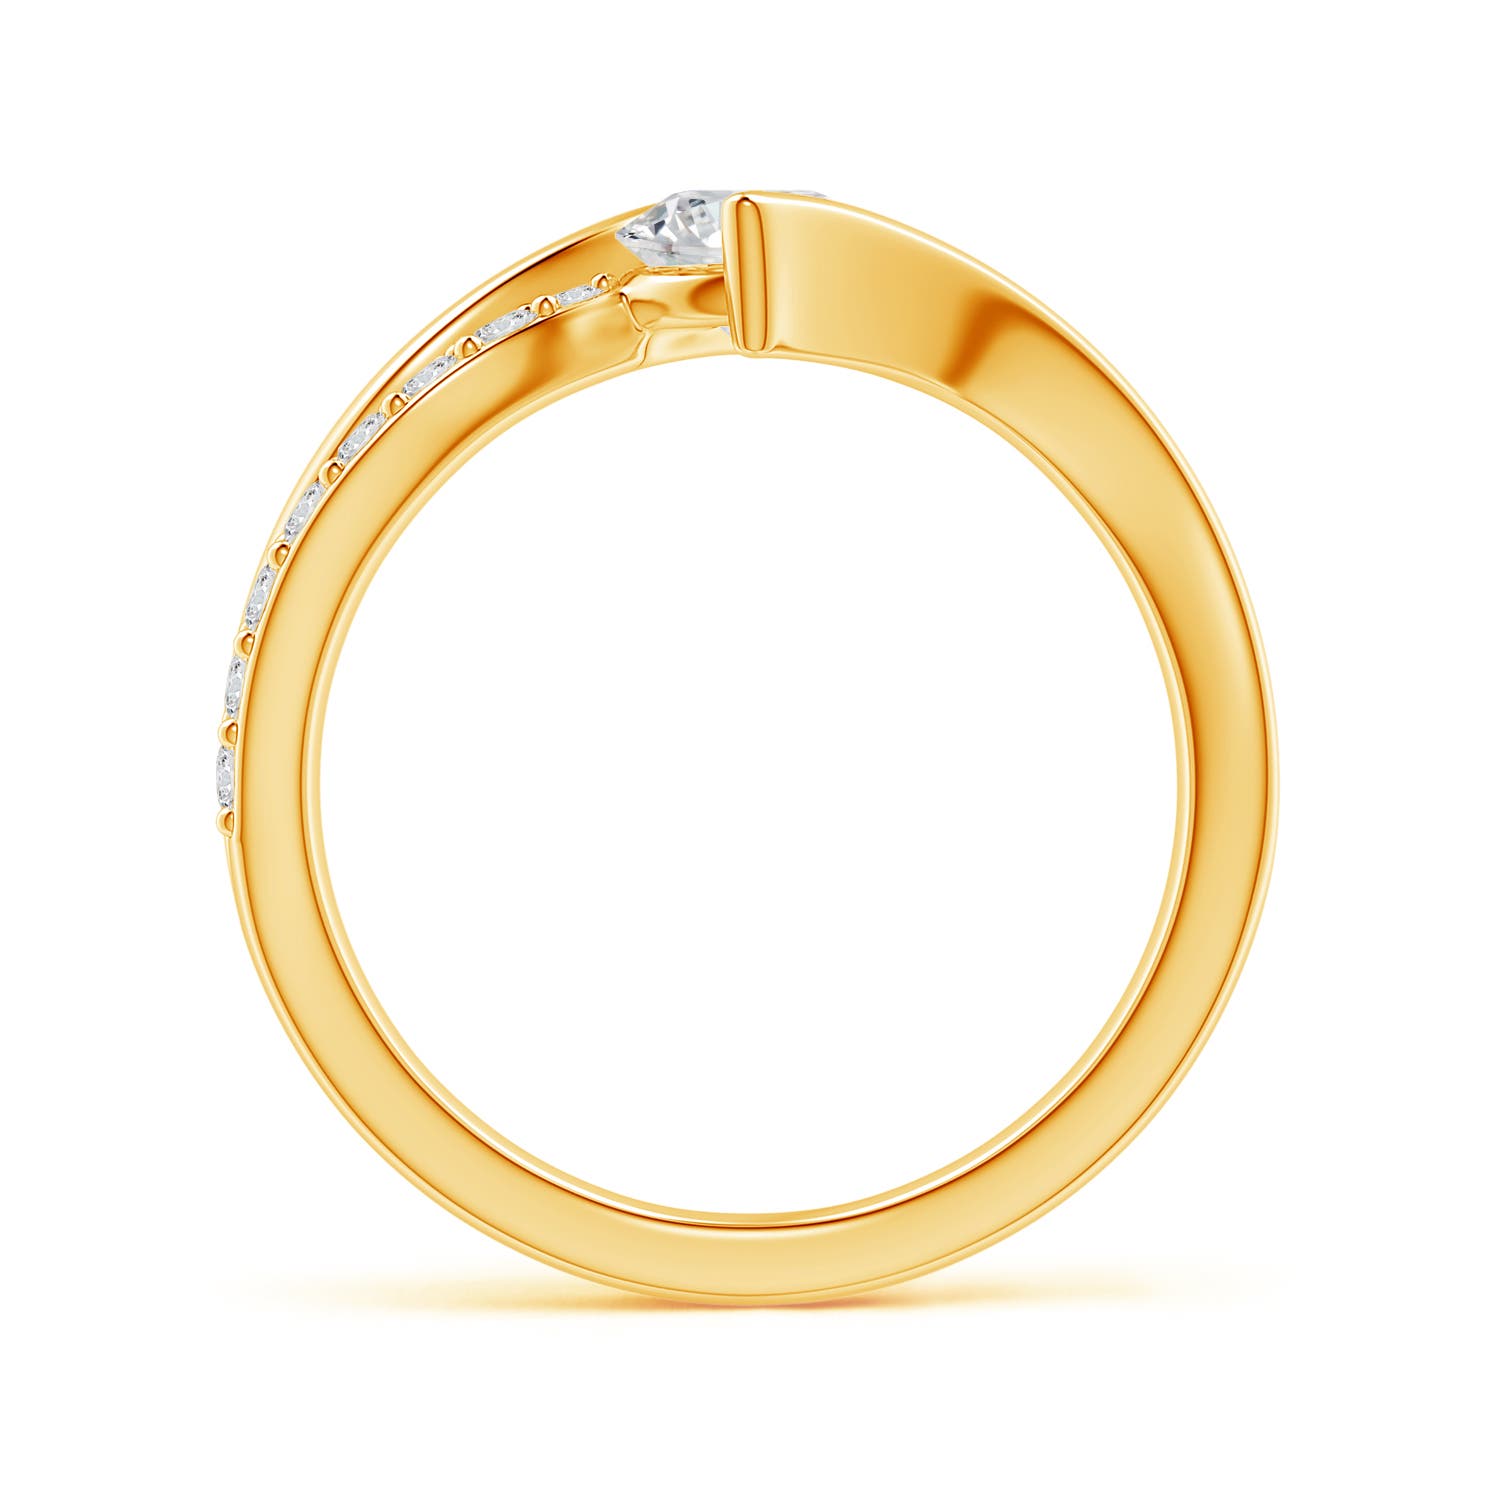 H, SI2 / 1 CT / 14 KT Yellow Gold